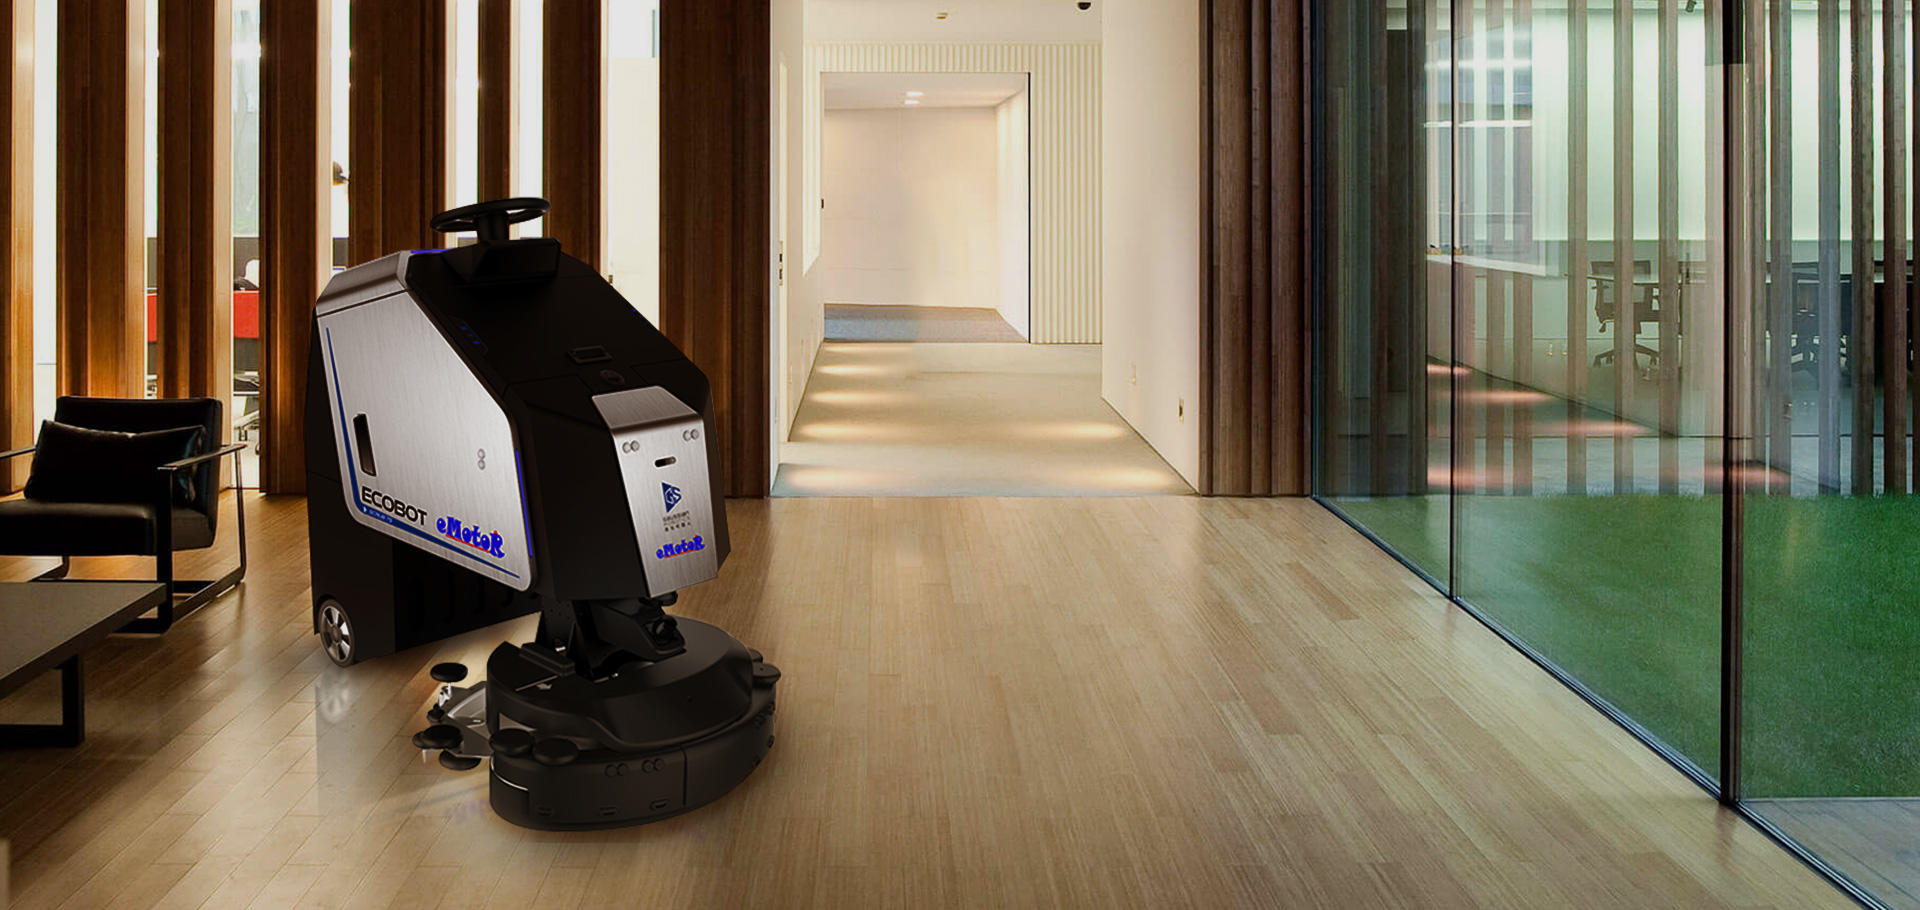 Carpet Cleaning Cleaning Robot